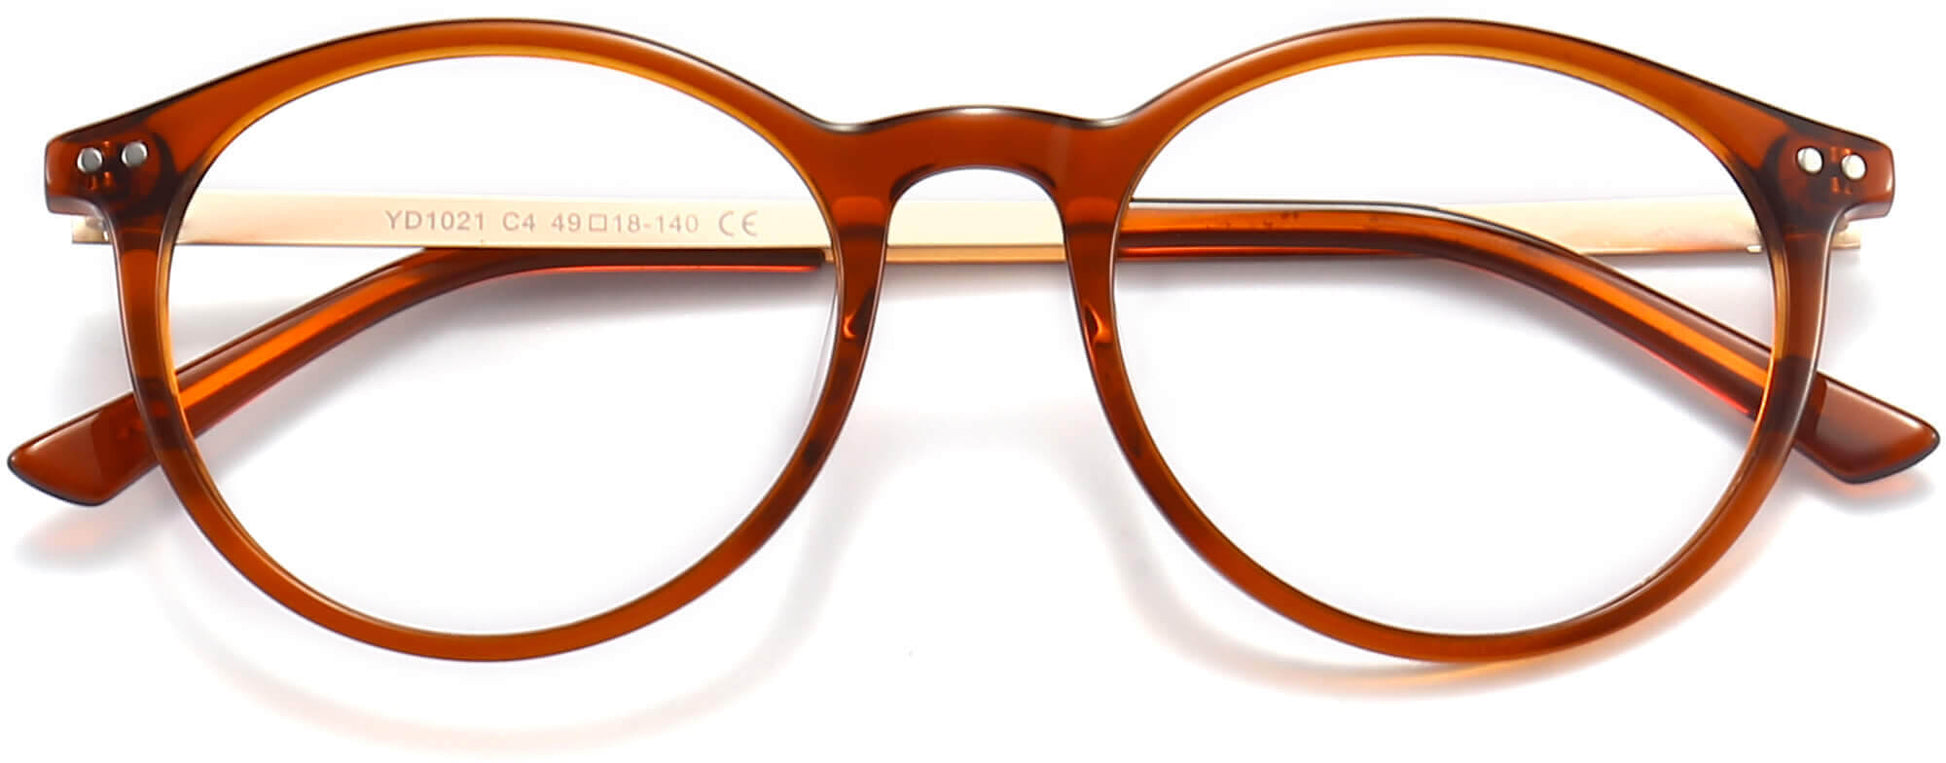 Dallas Round Brown Eyeglasses from ANRRI, closed view